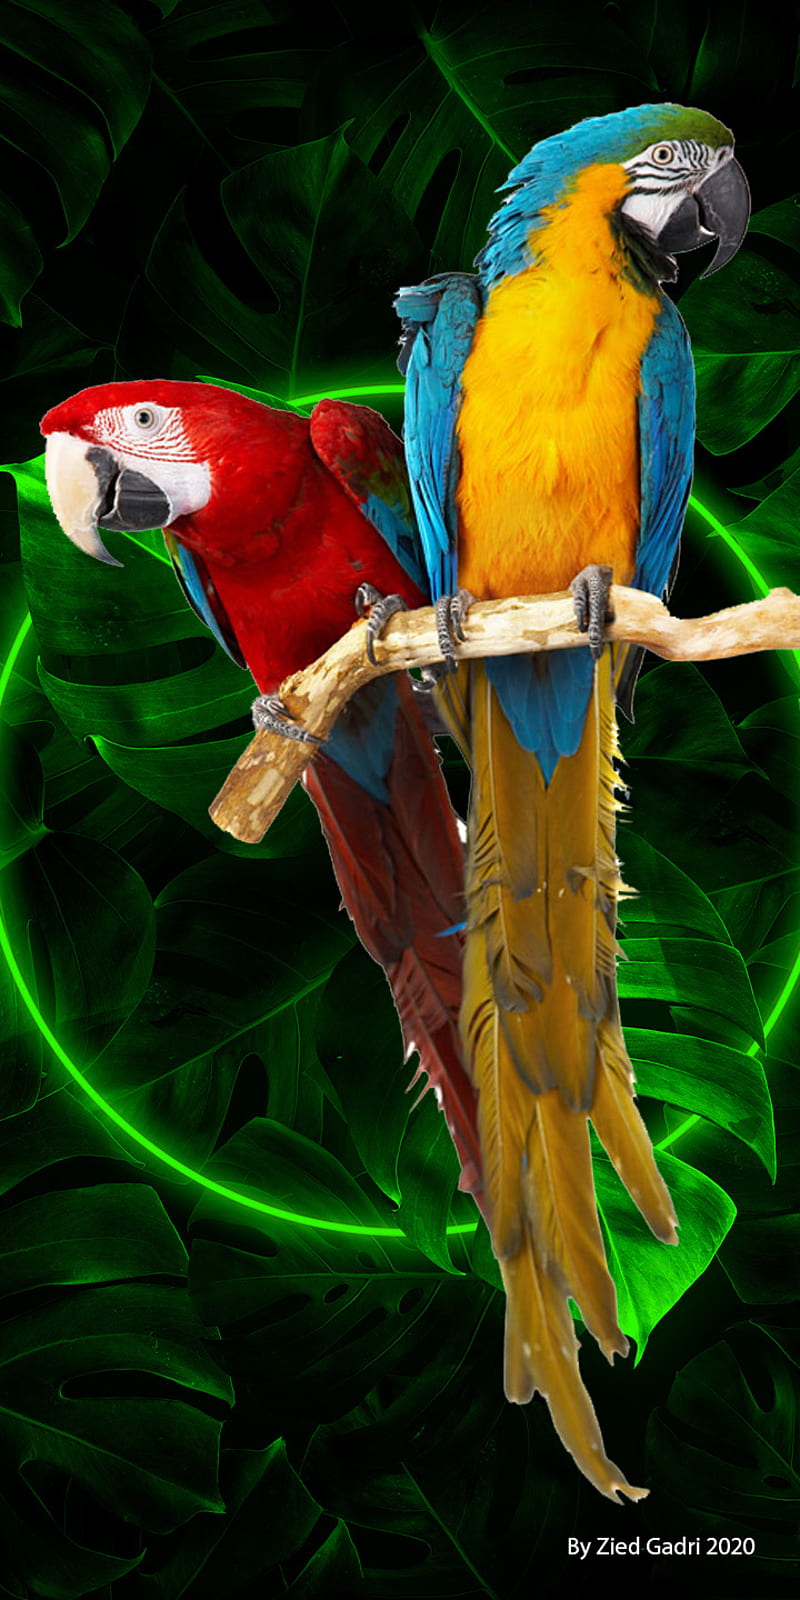 Wallpaper Hd Parrot Couple Branch With Orange Flowers  Wallpapers13com